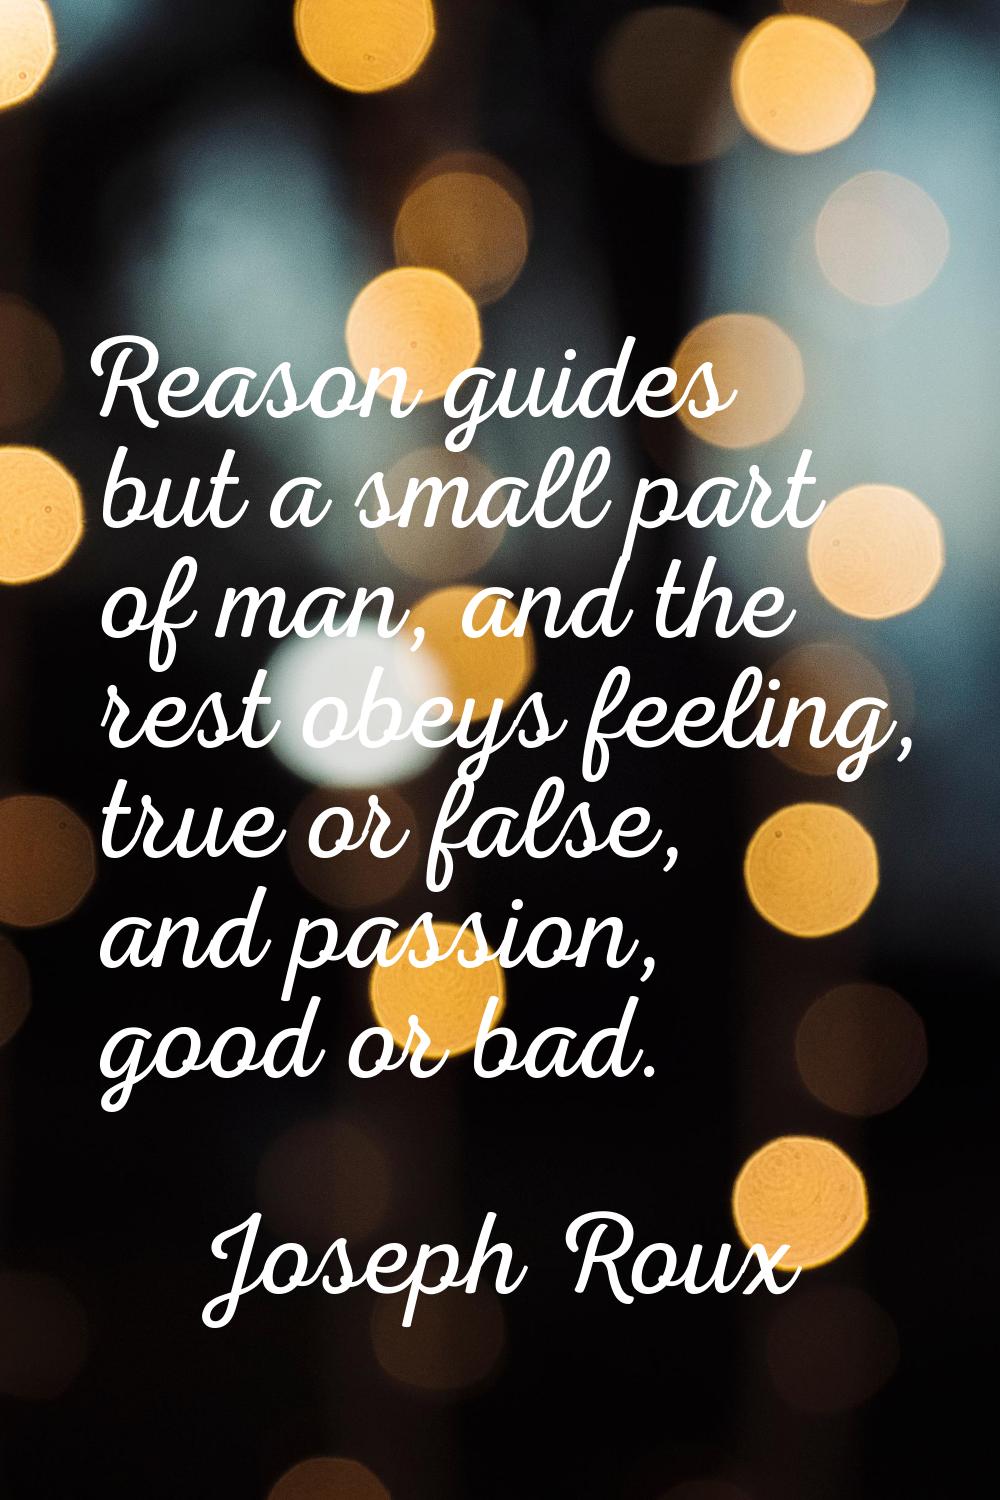 Reason guides but a small part of man, and the rest obeys feeling, true or false, and passion, good